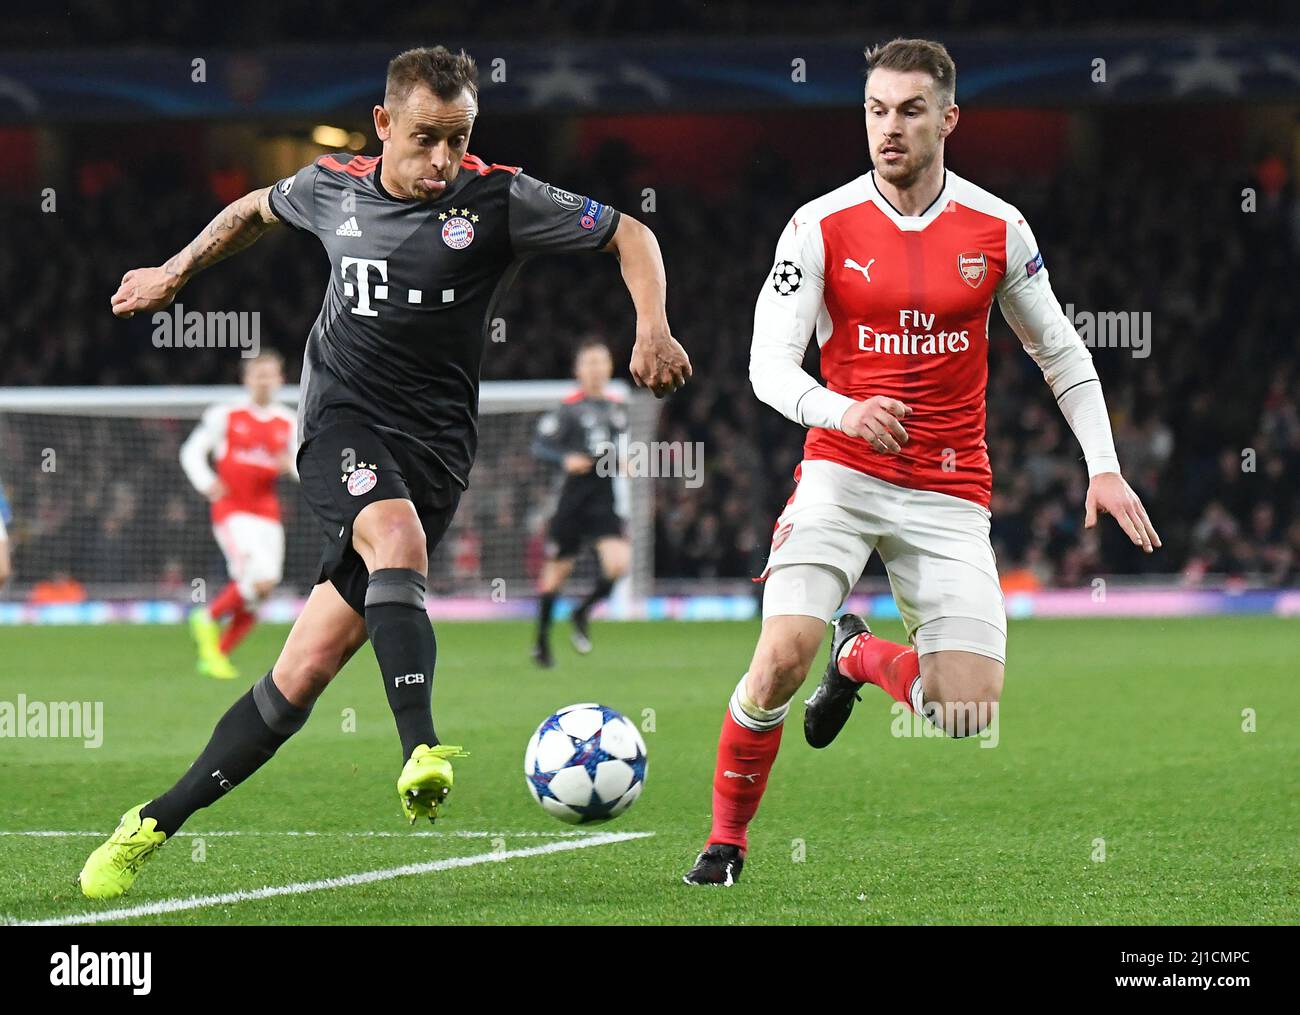 LONDON, ENGLAND - MARCH 7, 2017: Rafinha (L) of Bayern and Aaron Ramsey (R) of Arsenal pictured in action during the second leg of the UEFA Champions League Round of 16 game between Arsenal FC and Bayern Munchen at Emirates Stadium. Copyright: Cosmin Iftode/Picstaff Stock Photo